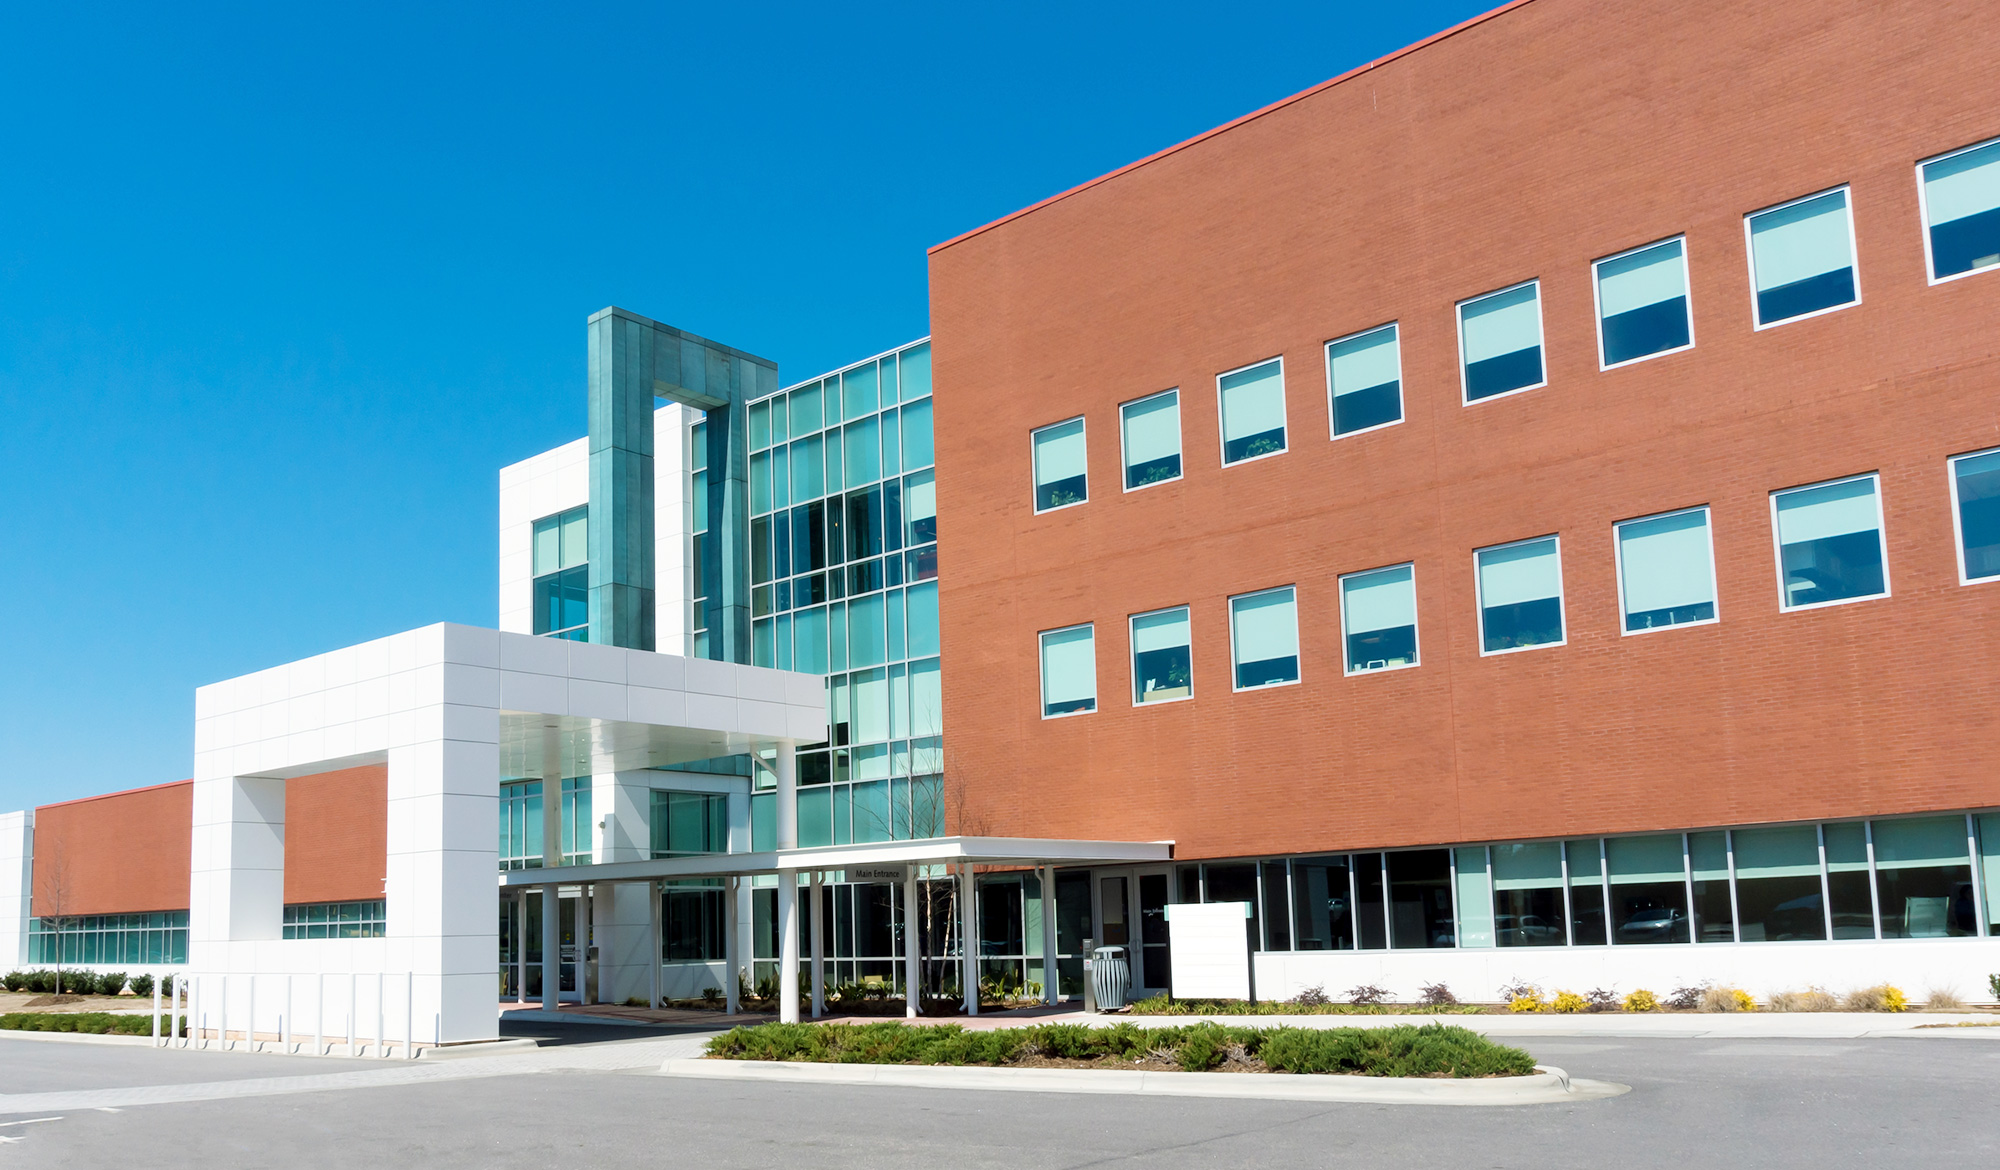 Building Industries served by MiTek - The exterior of a healthcare medical building with drive-up overhang